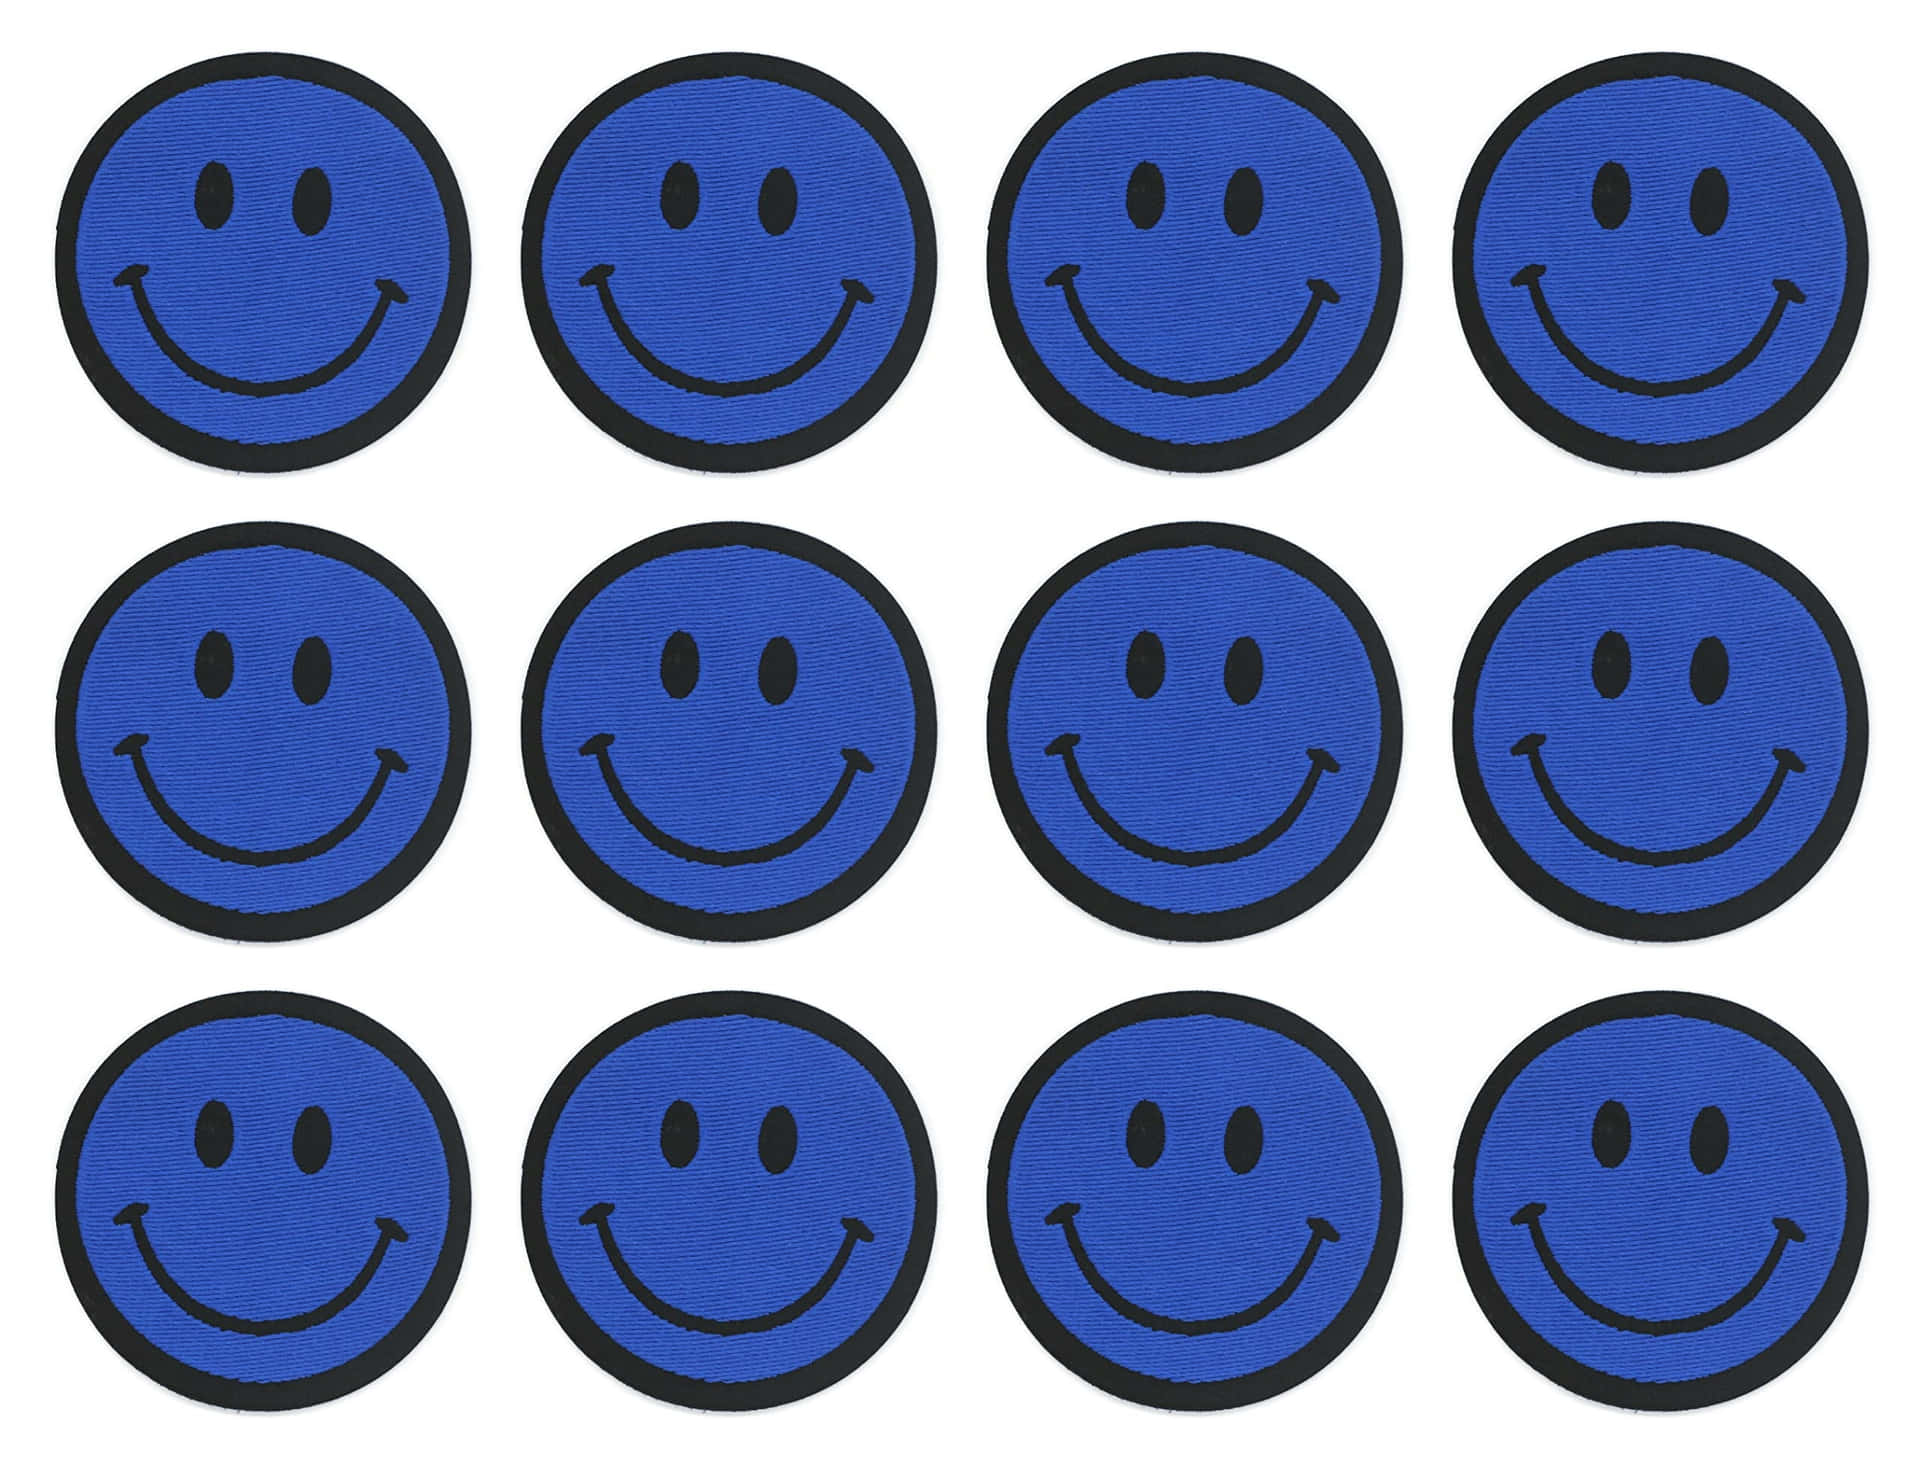 Blue_ Smiley_ Face_ Patches_ Grid Wallpaper